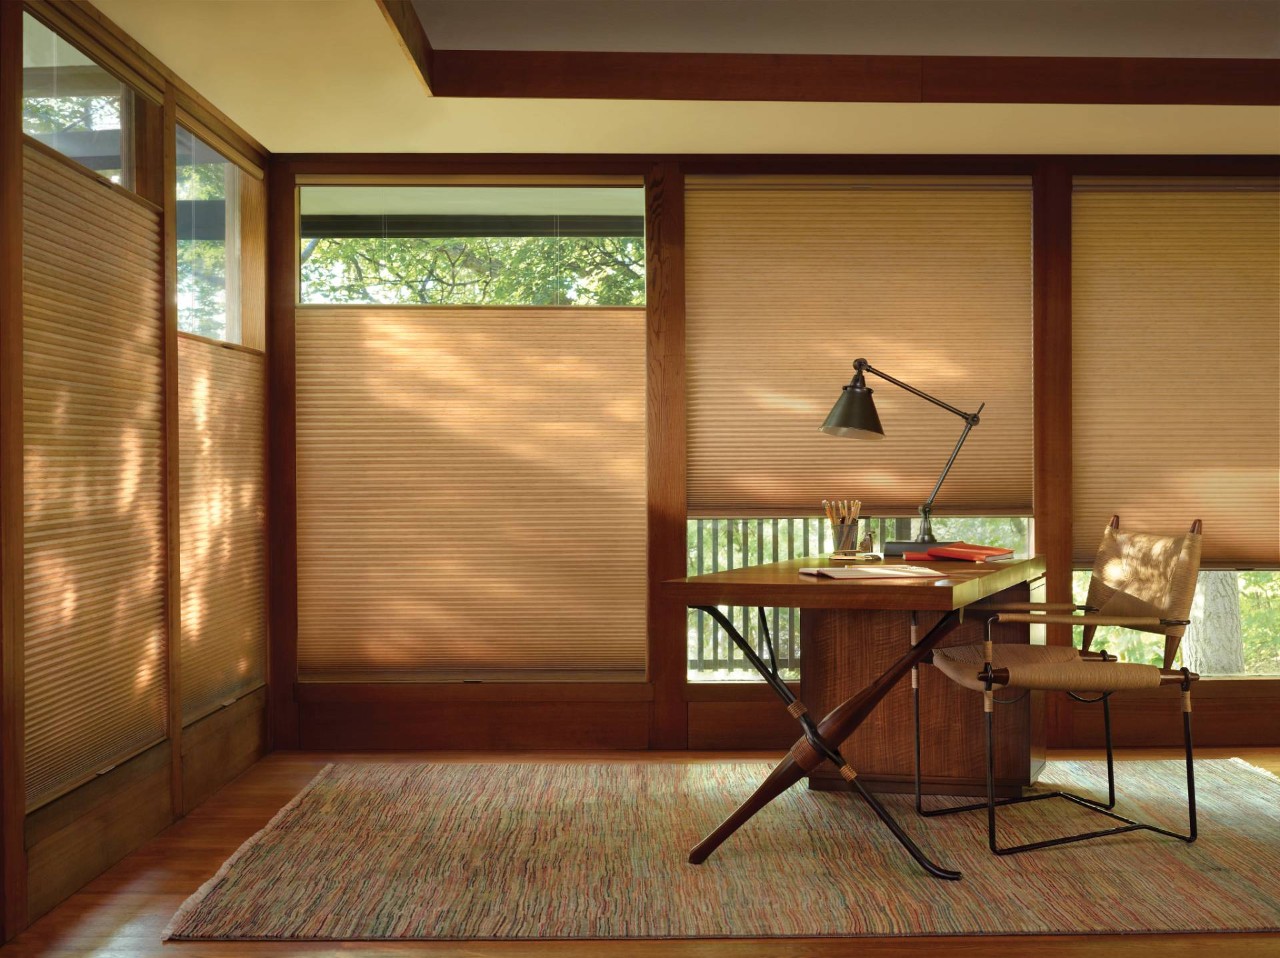 Hunter Douglas Duette® Cellular Shades for Corporate Offices in Mobile, Alabama (AL)